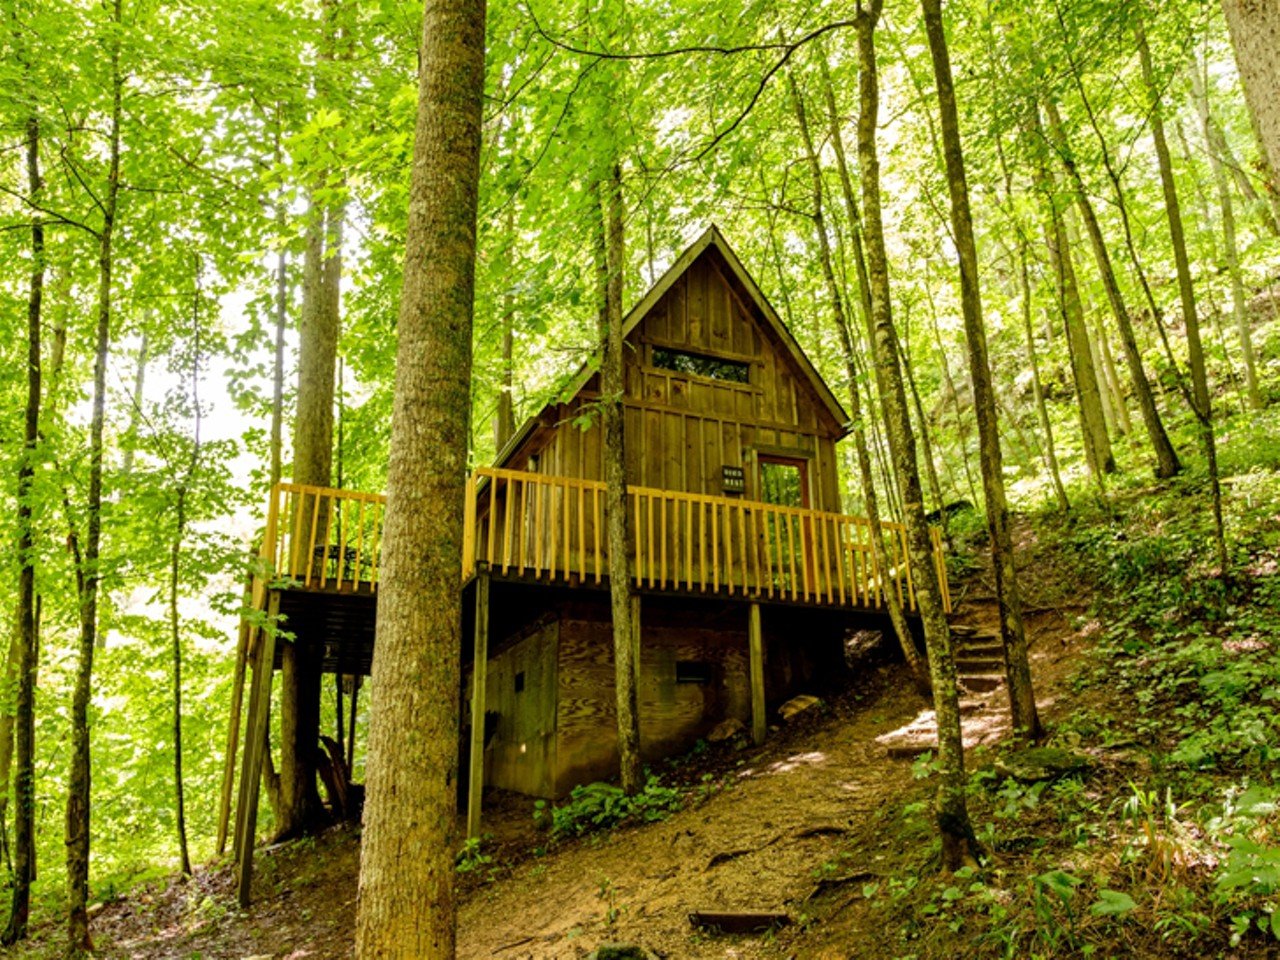 Bird Nest Cabin - Quiet Waters Cabins
Slade, Kentucky | Entire Cabin | Starting at $149/night | Hosts 2 Guests 
&#147;Enjoy an uncomplicated escape, surrounded by nature. This cabin is part of a 5 cabin complex connected by wooden walkways and staircases at Natural Bridge State Park. Take a five minute hike up to the cabin. This group of cabins is wonderful for family reunions.&#148;